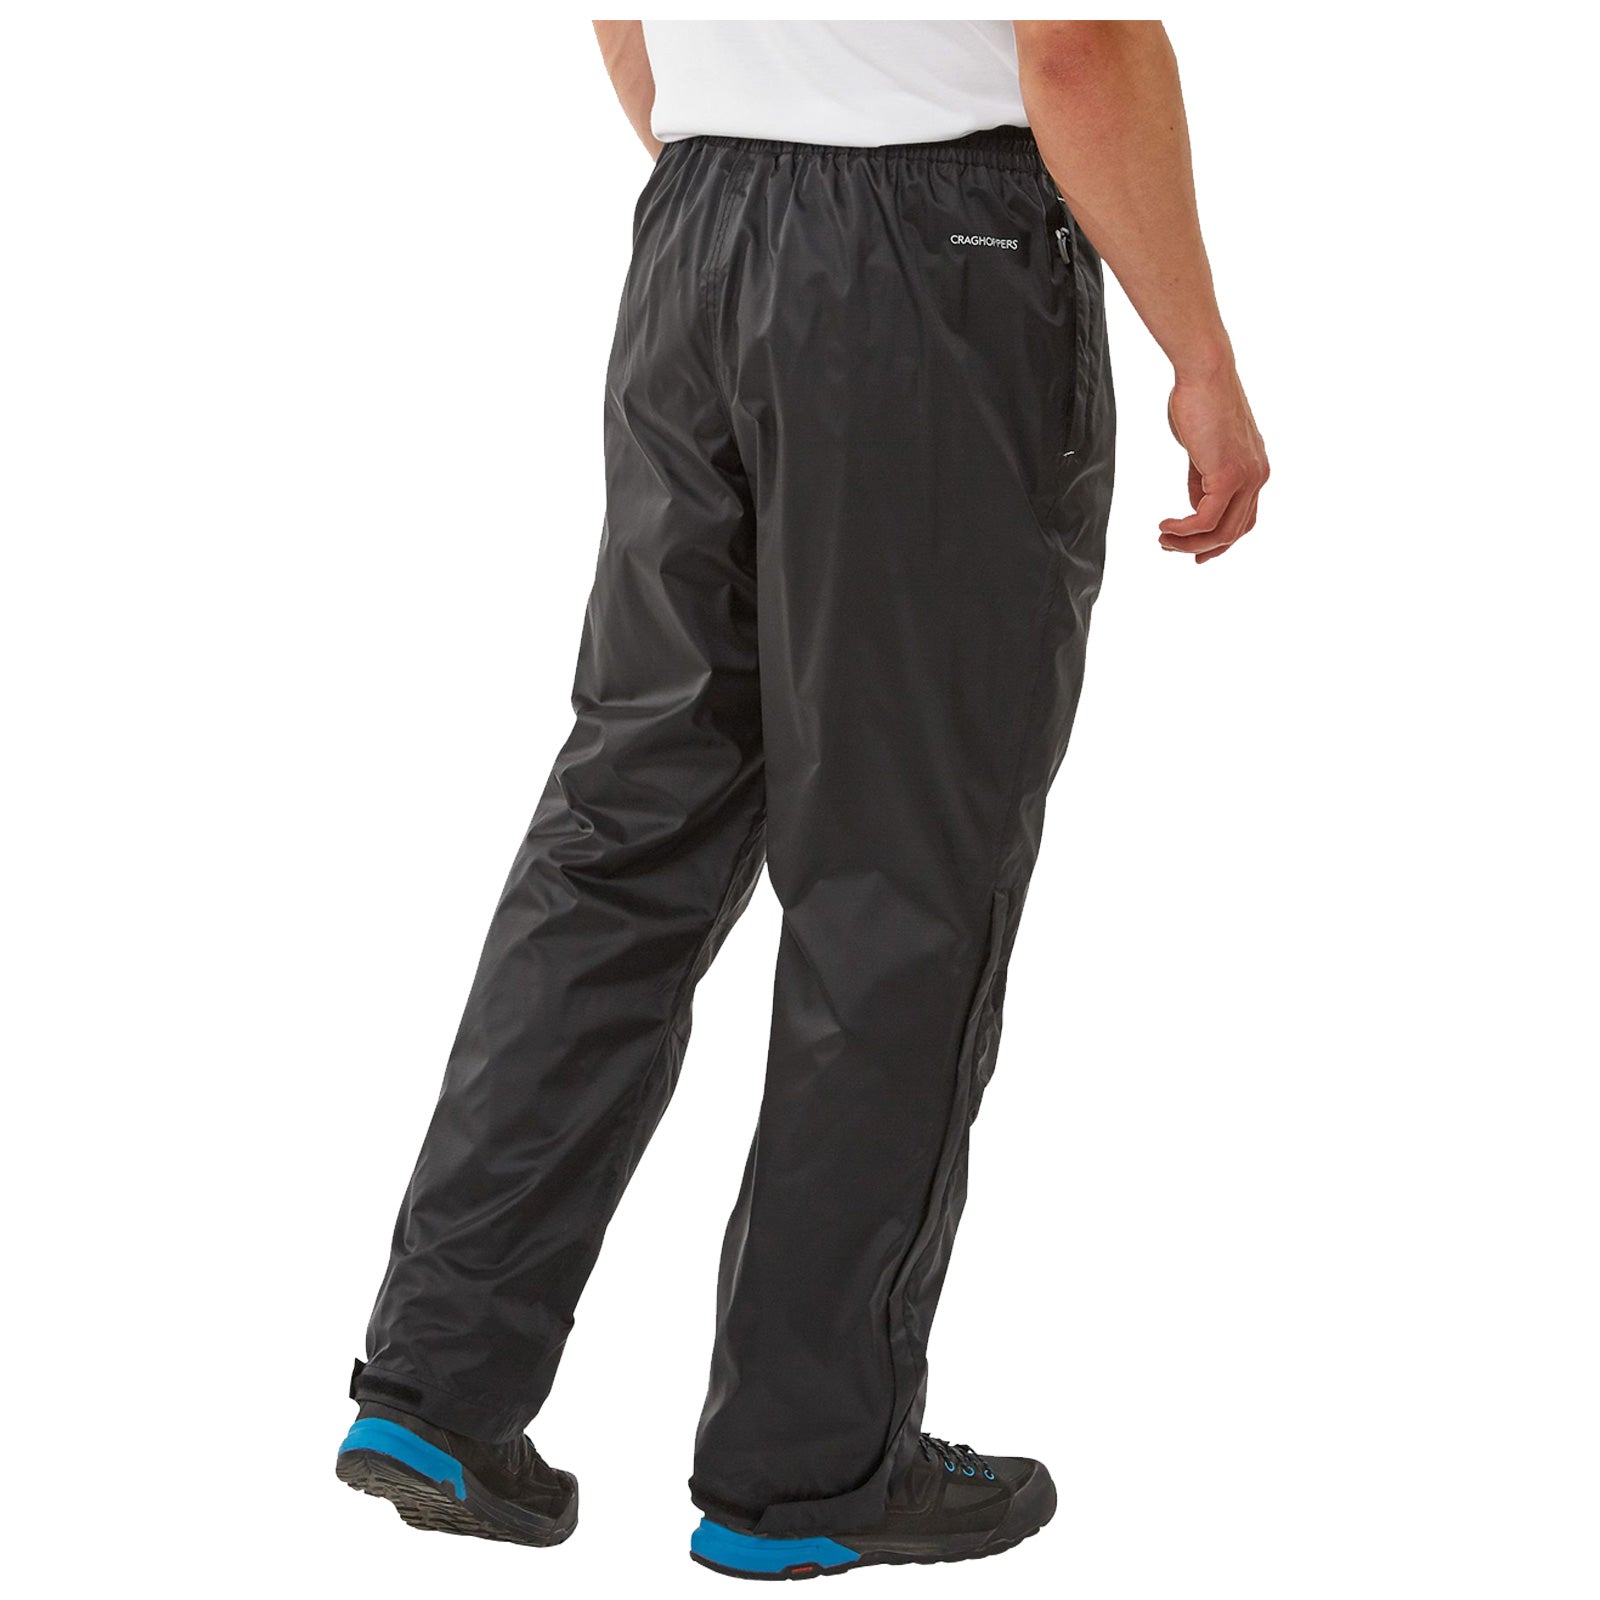 Craghoppers Unisex Ascent Waterproof Overtrousers